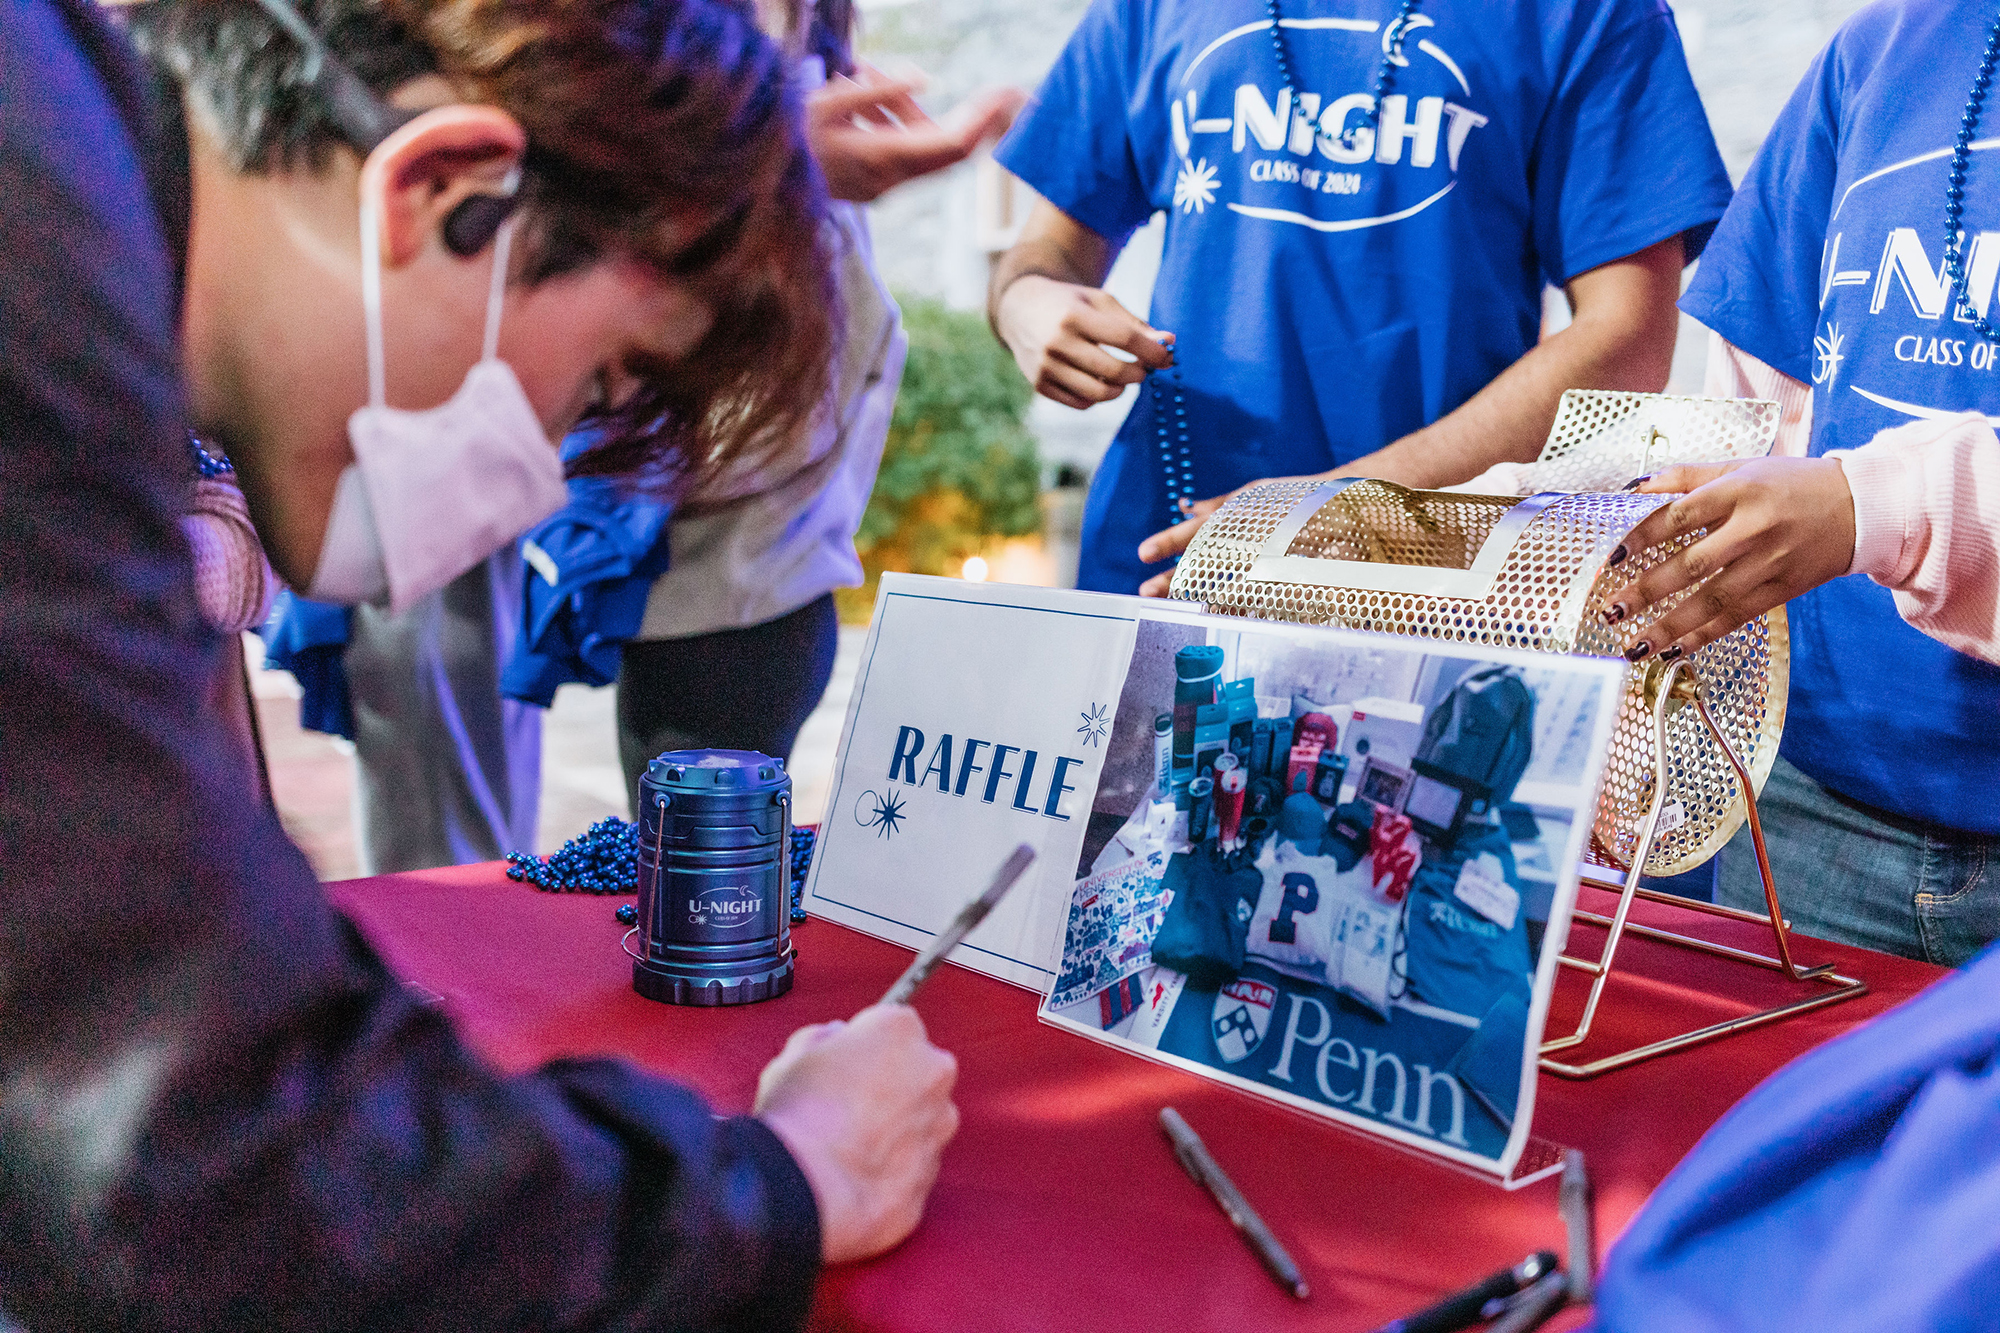 A masked student fills out a raffle ticket at a table under the tent at U-Night.